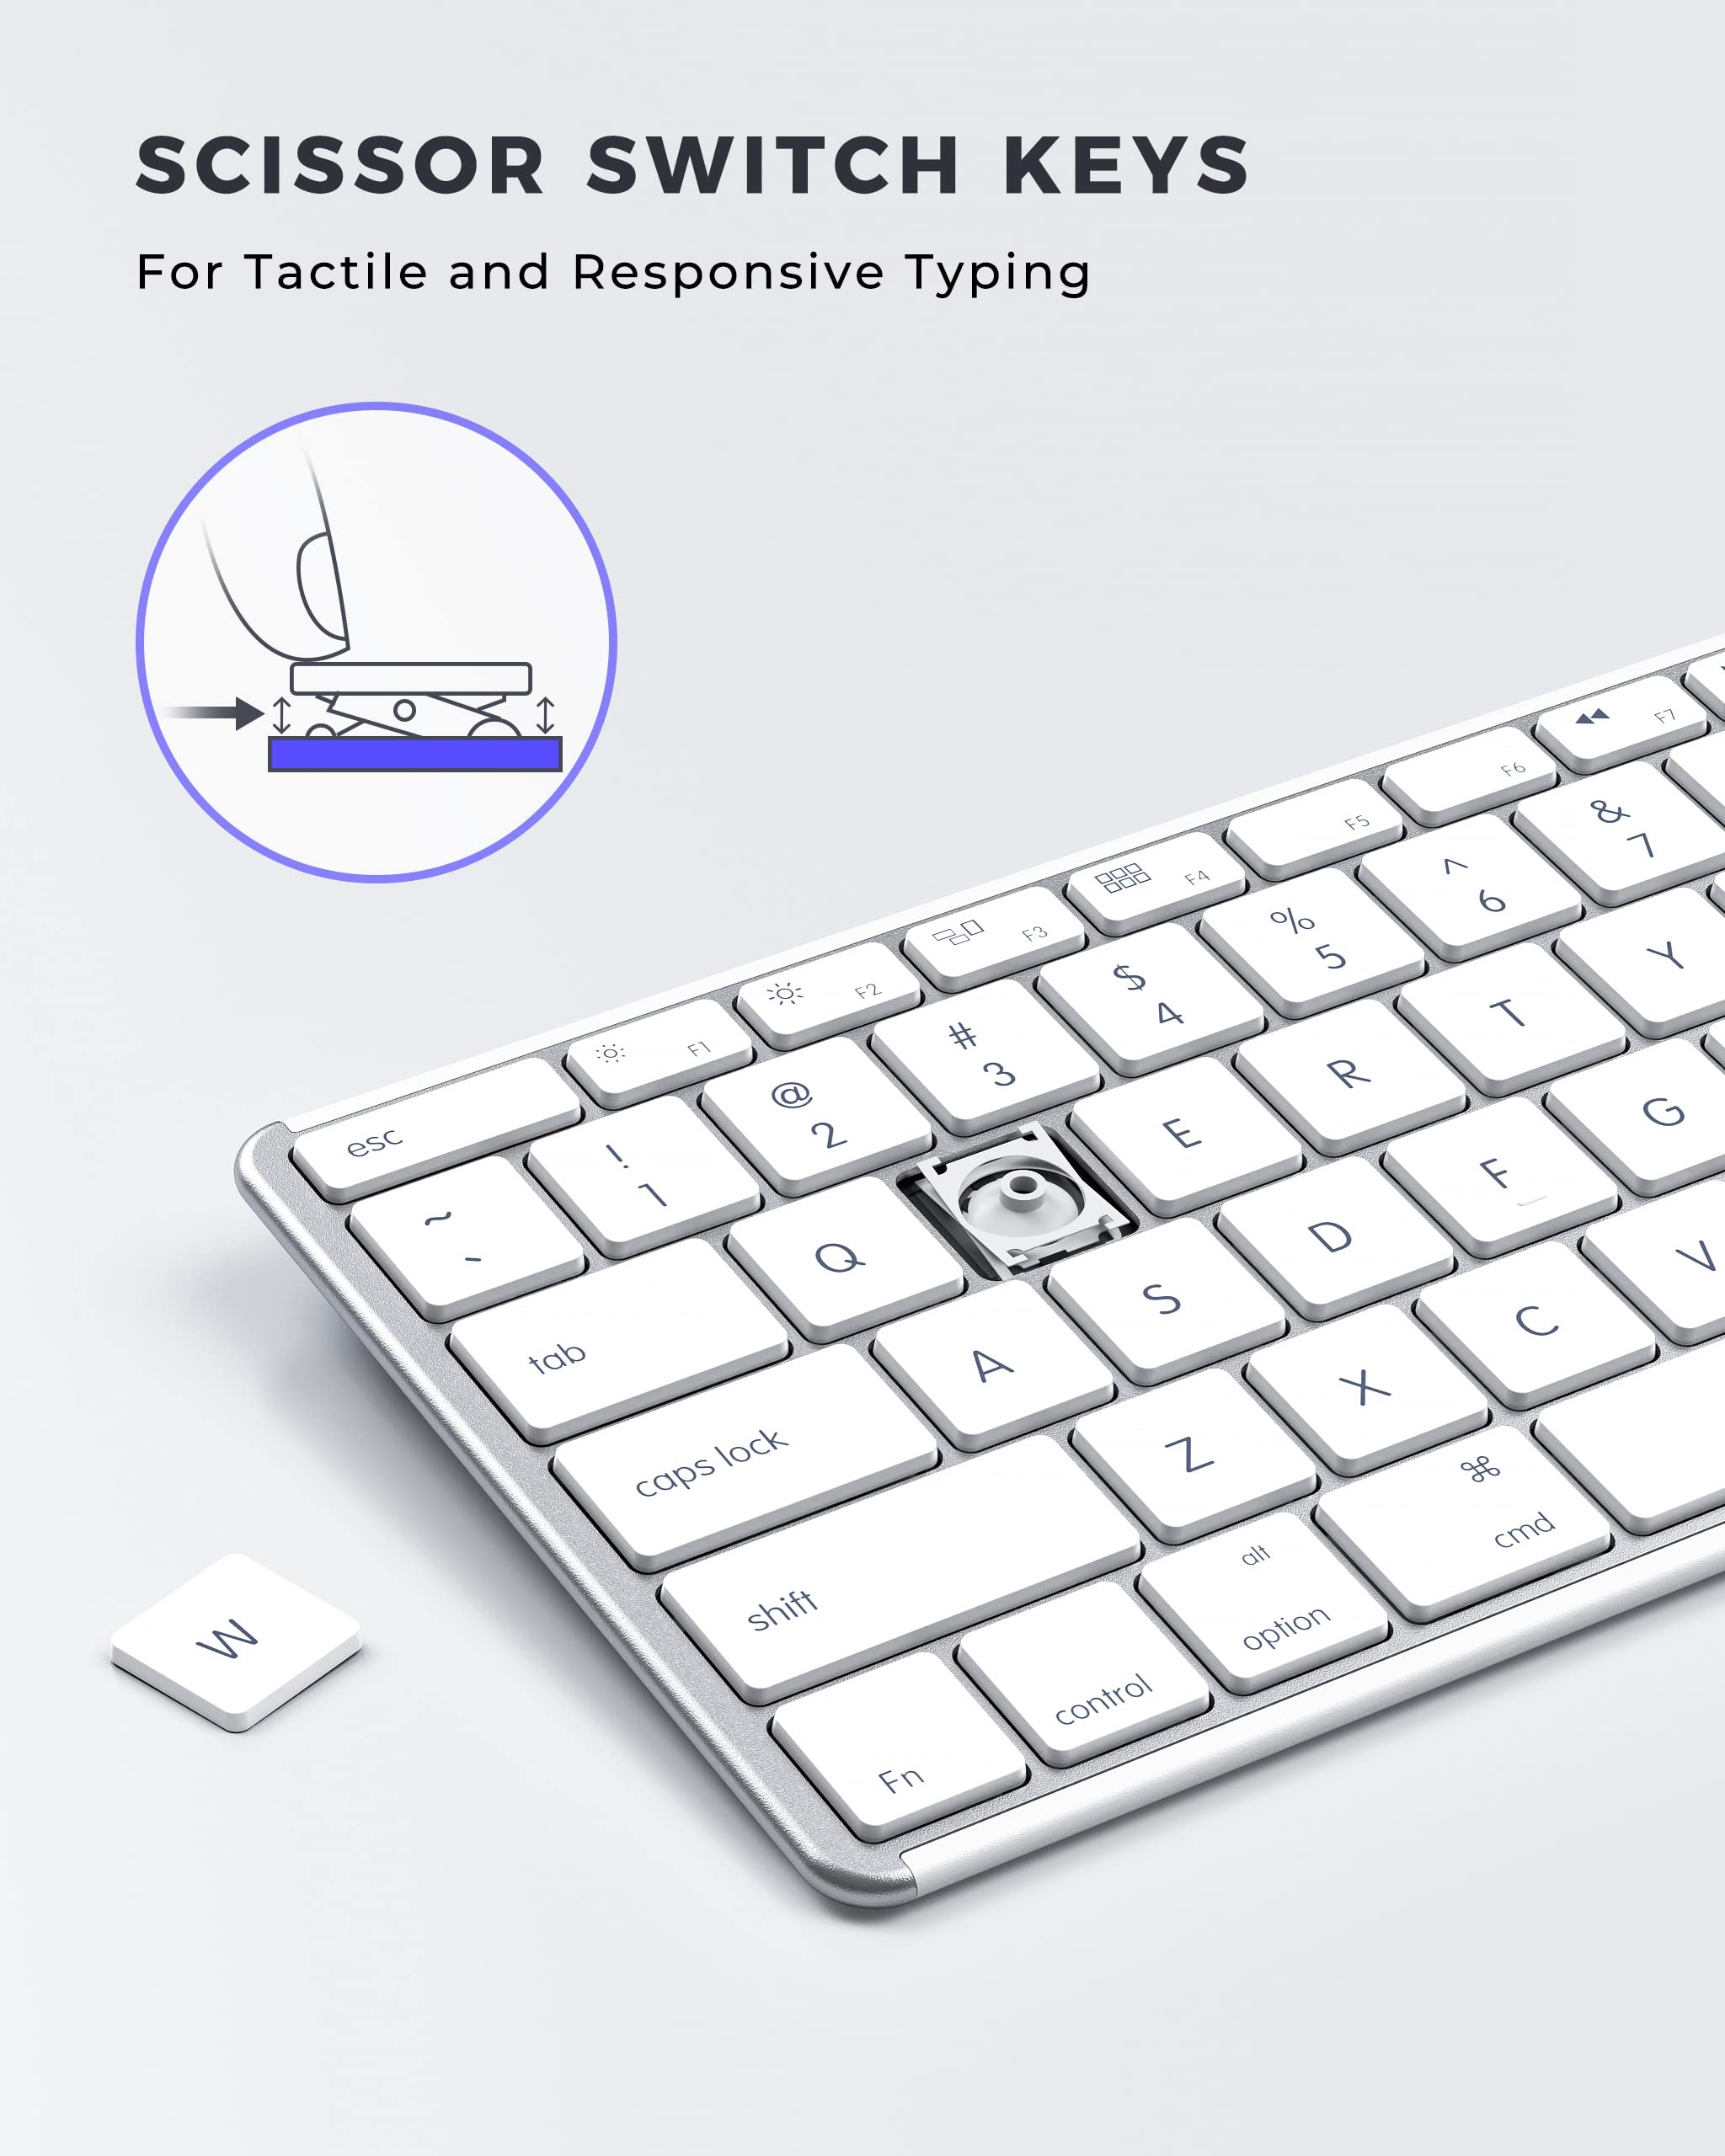 Wireless Bluetooth Keyboard and Mouse Compatible for Mac, seenda Stainless Steel Multi-Device Keyboard and Mouse Rechargeable with Number Pad, Compatible for Mac, iPad, iOS, Silver